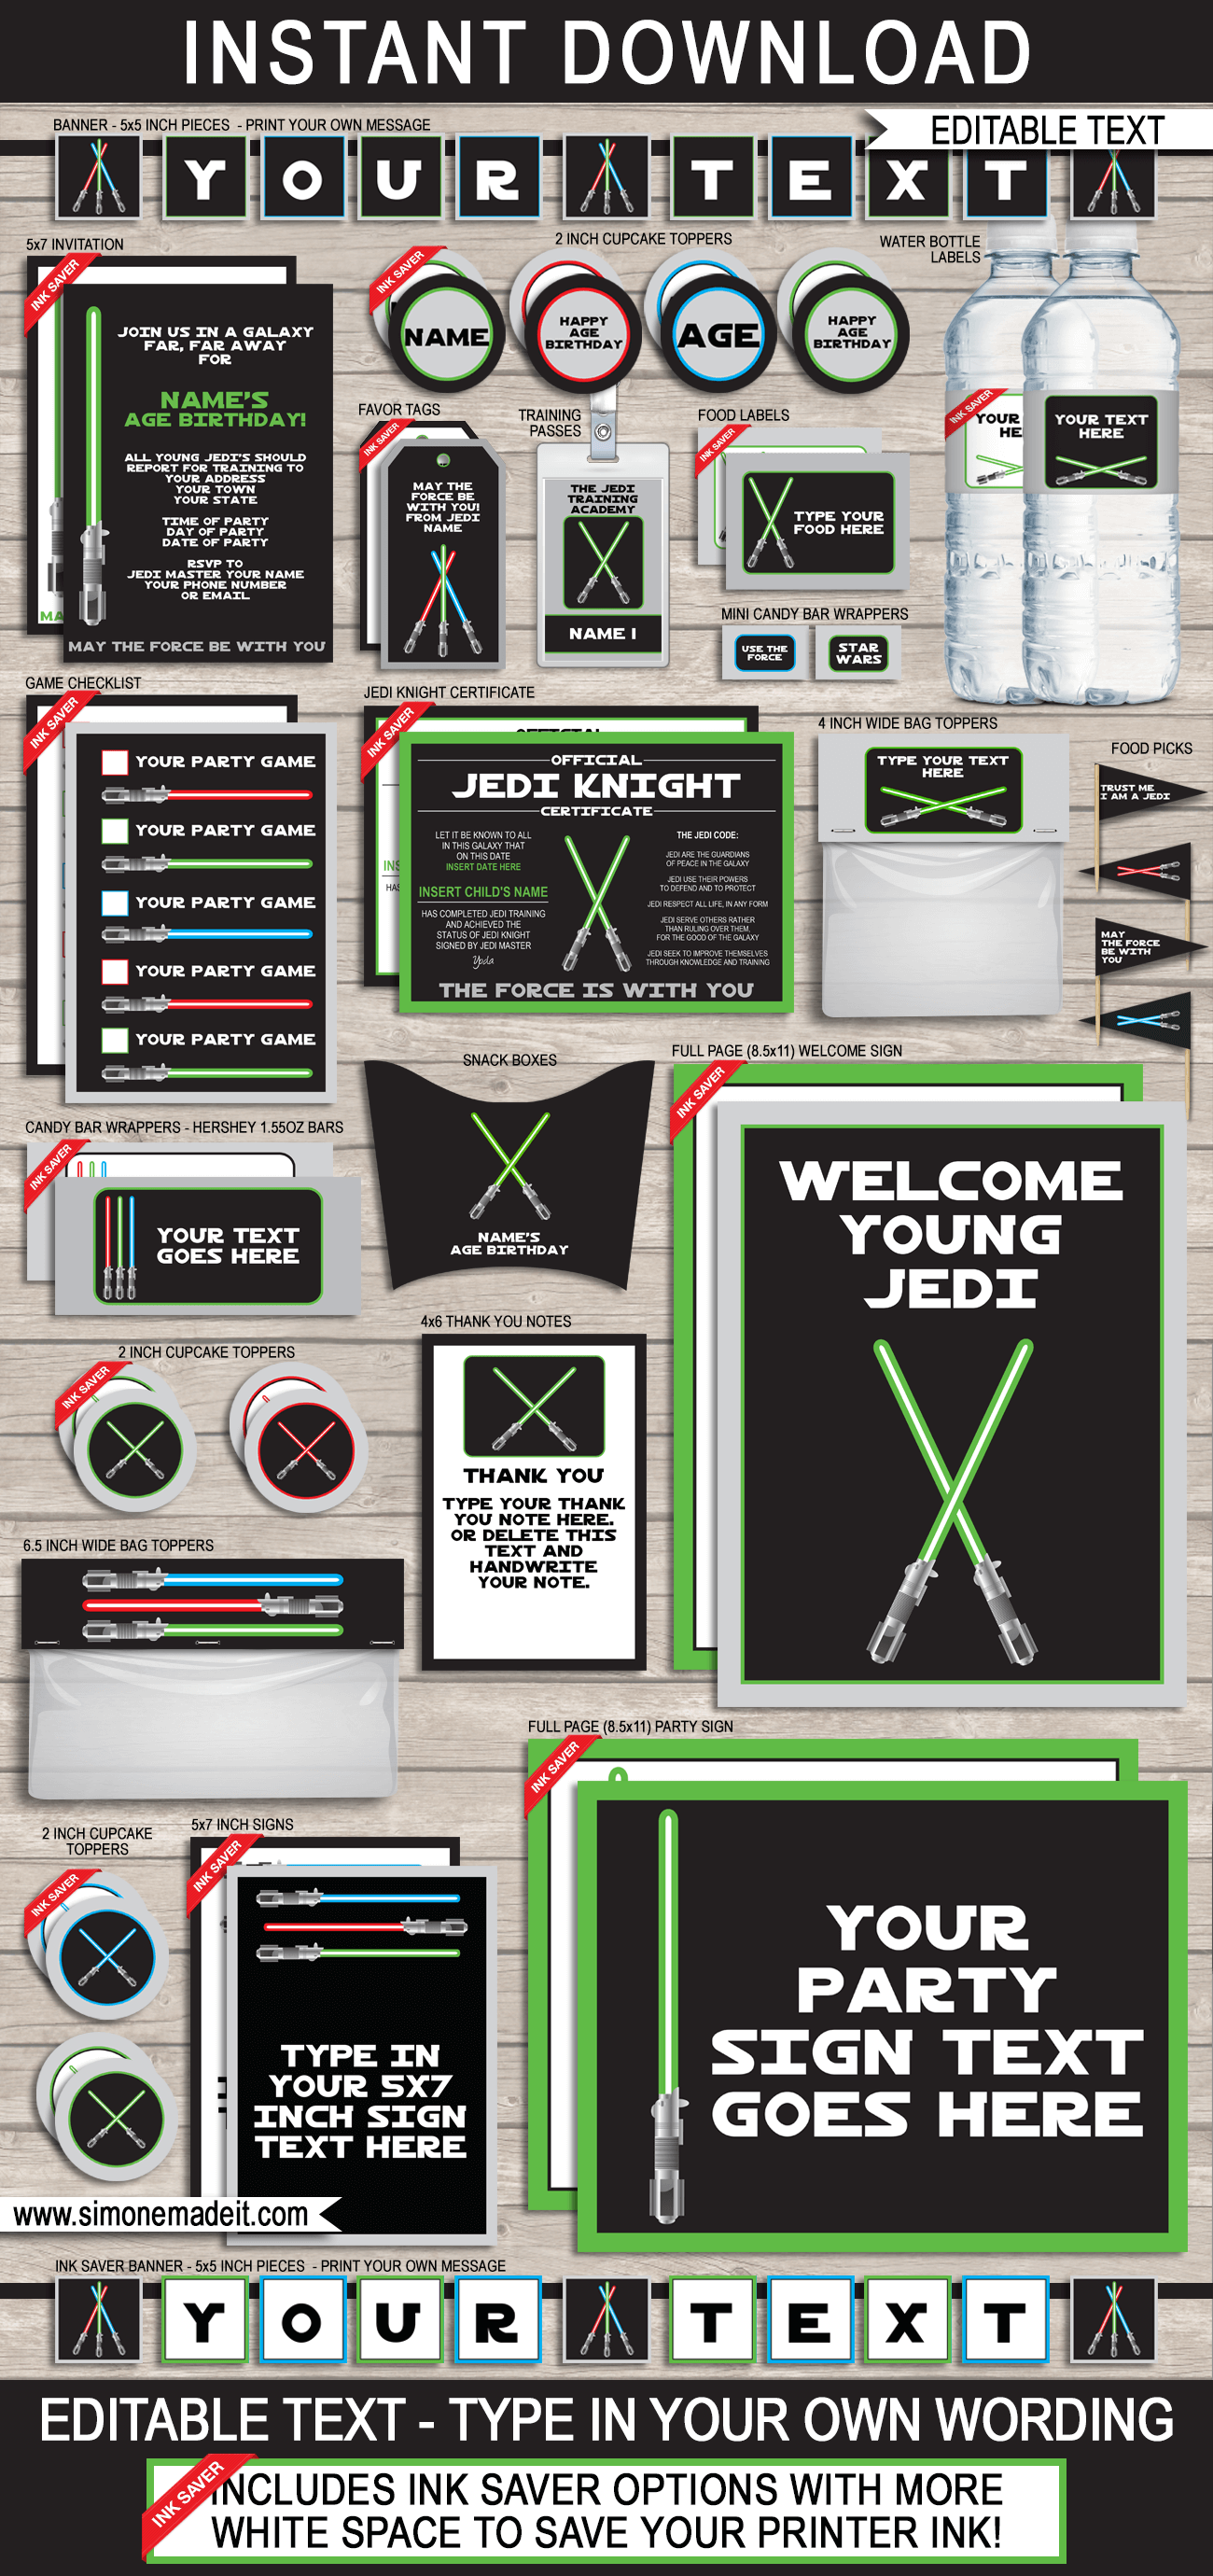 Full collection of Star Wars Party Printables Invitations Decorations | Editable Templates | INSTANT DOWNLOAD $12.50 via simonemadeit.com